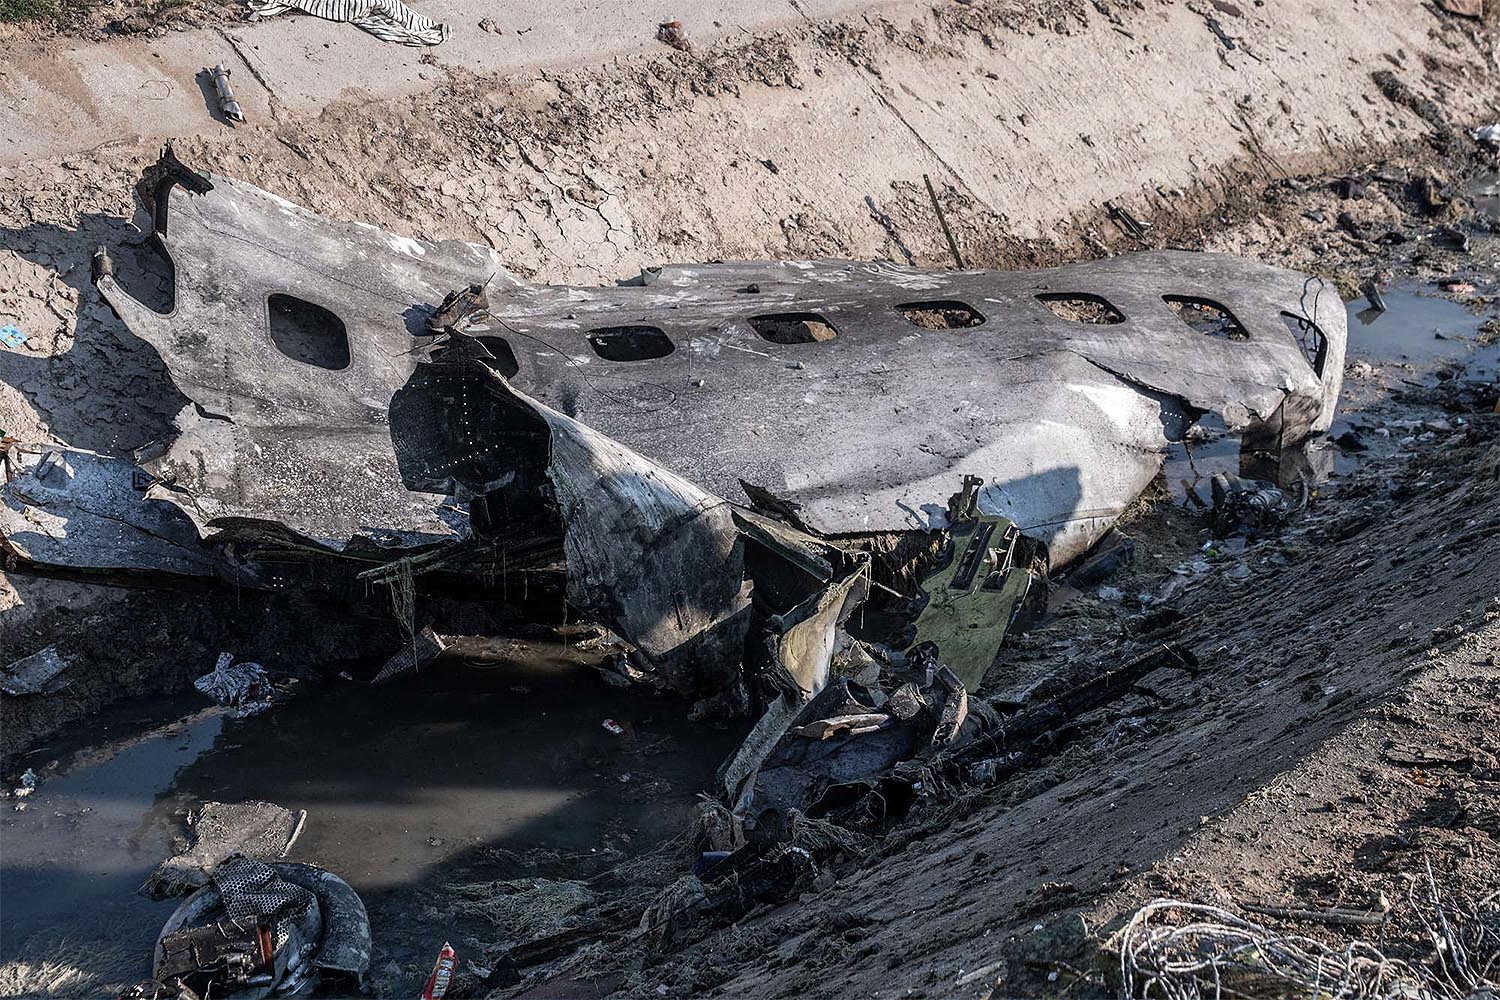 A piece of airplane fuselage at the scene of the crash